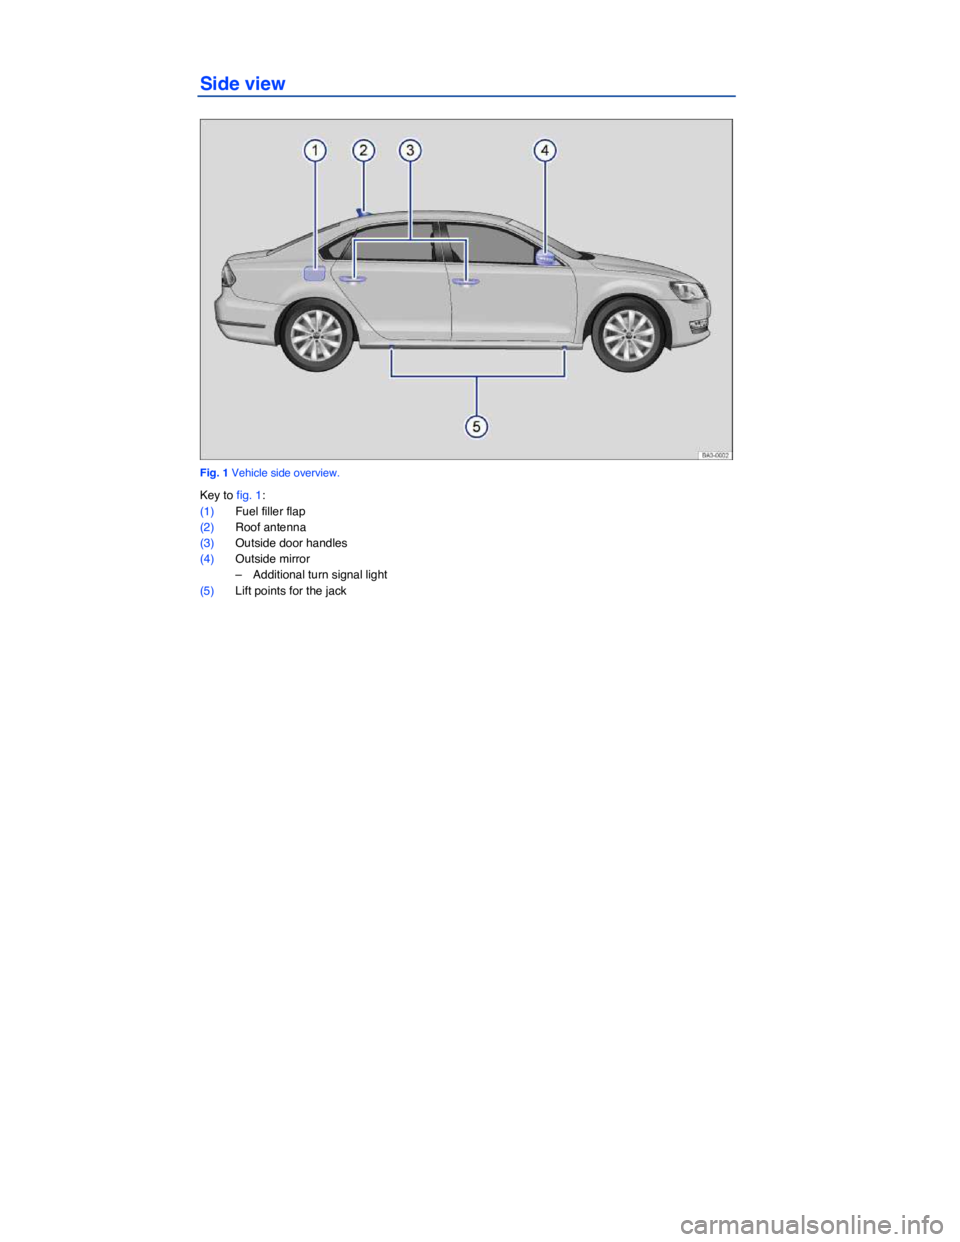 VOLKSWAGEN PASSAT 2014  Owner´s Manual  
Side view 
 
Fig. 1 Vehicle side overview. 
Key to fig. 1: 
(1) Fuel filler flap  
(2) Roof antenna  
(3) Outside door handles  
(4) Outside mirror  
–  Additional turn signal light  
(5) Lift poi